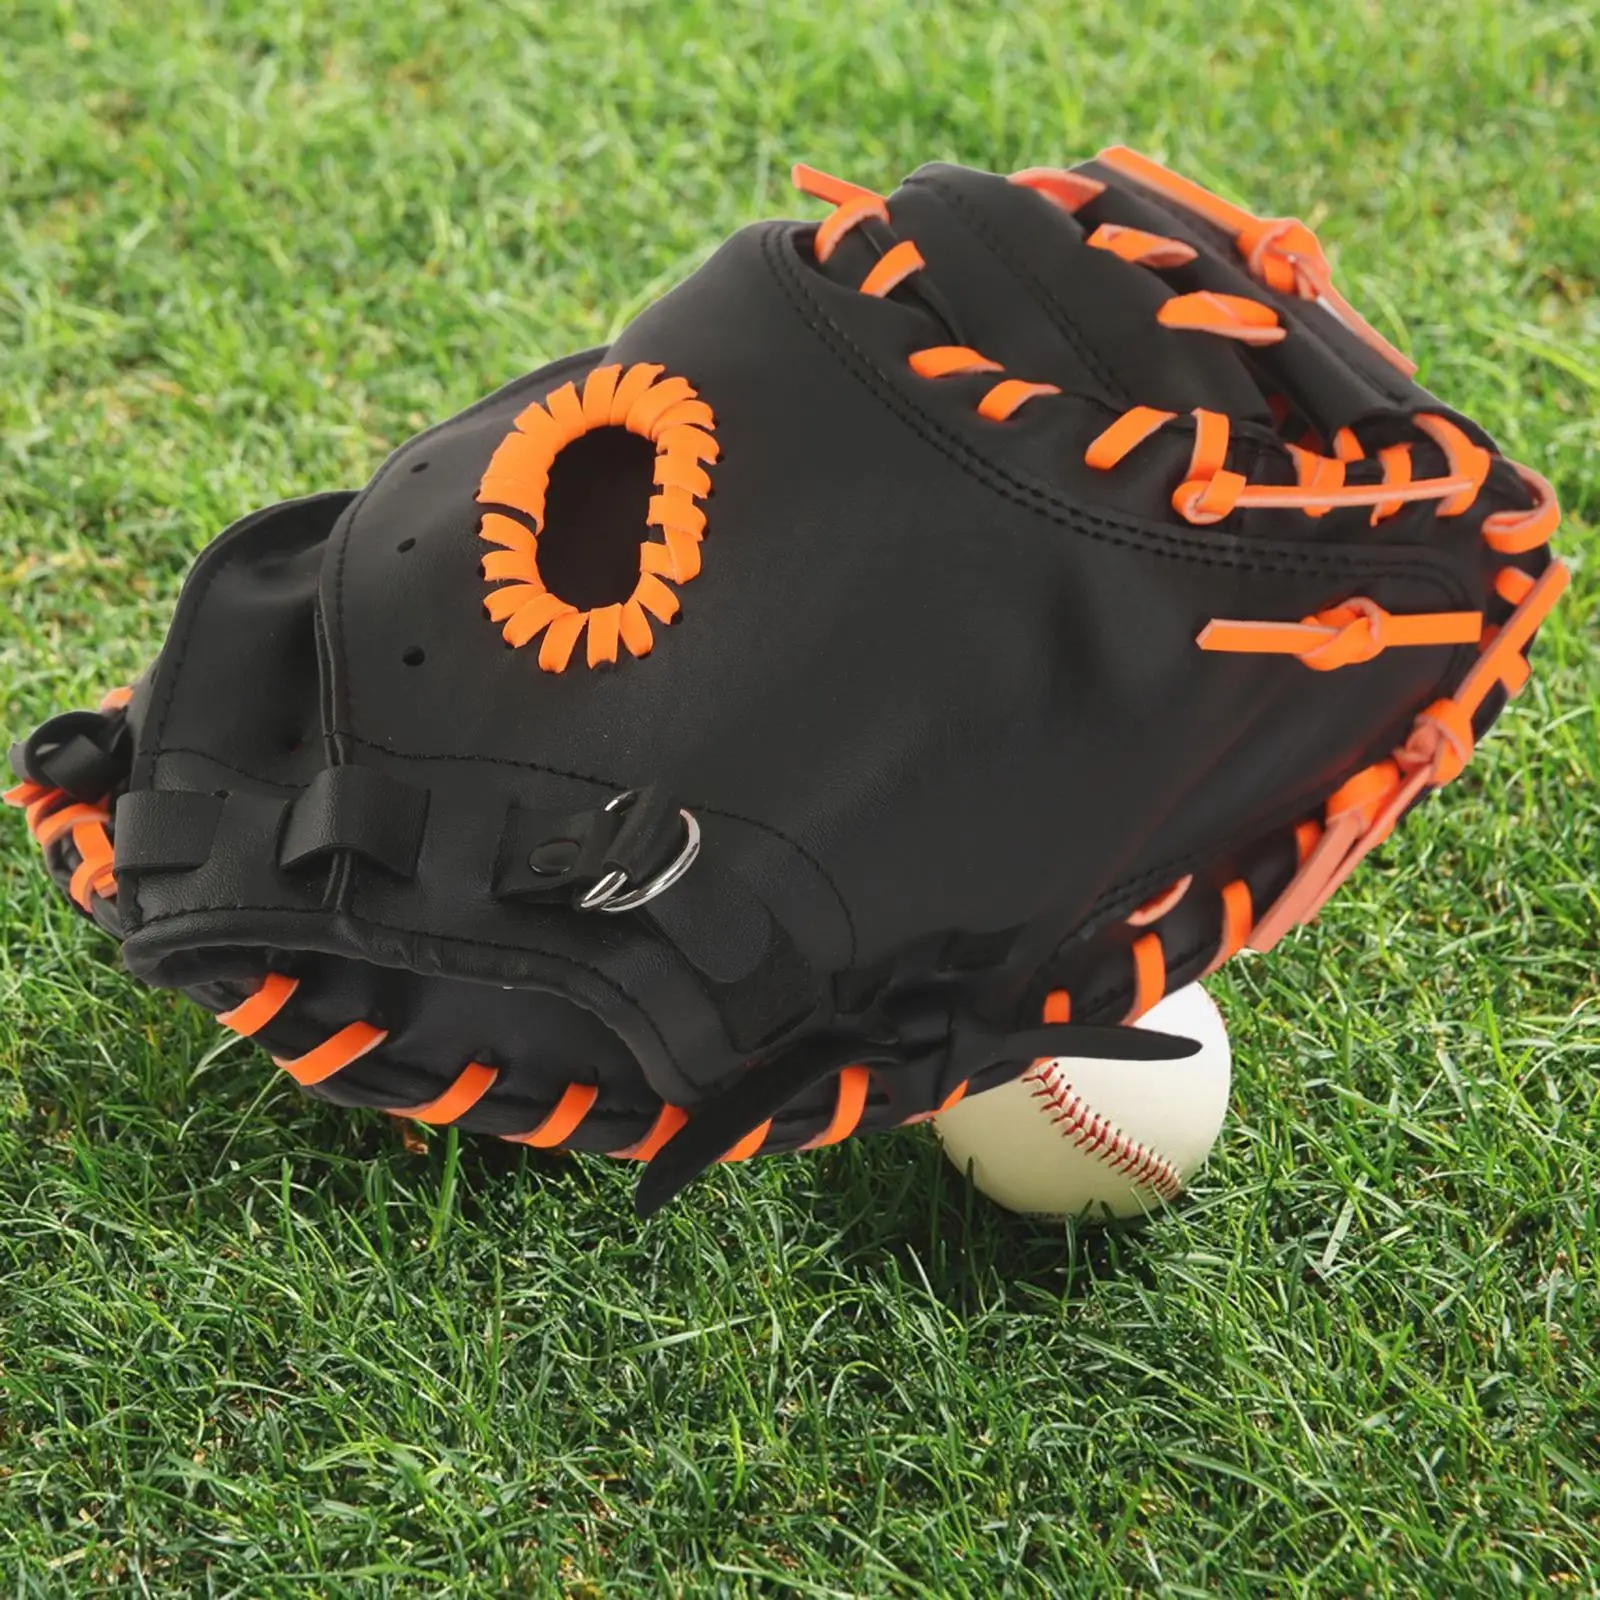 Baseball Gloves PU Leather Baseball Softball Mitt Infield Gloves Soft Thickened Catcher Mitts for Adults Beginner Outdoor Sports